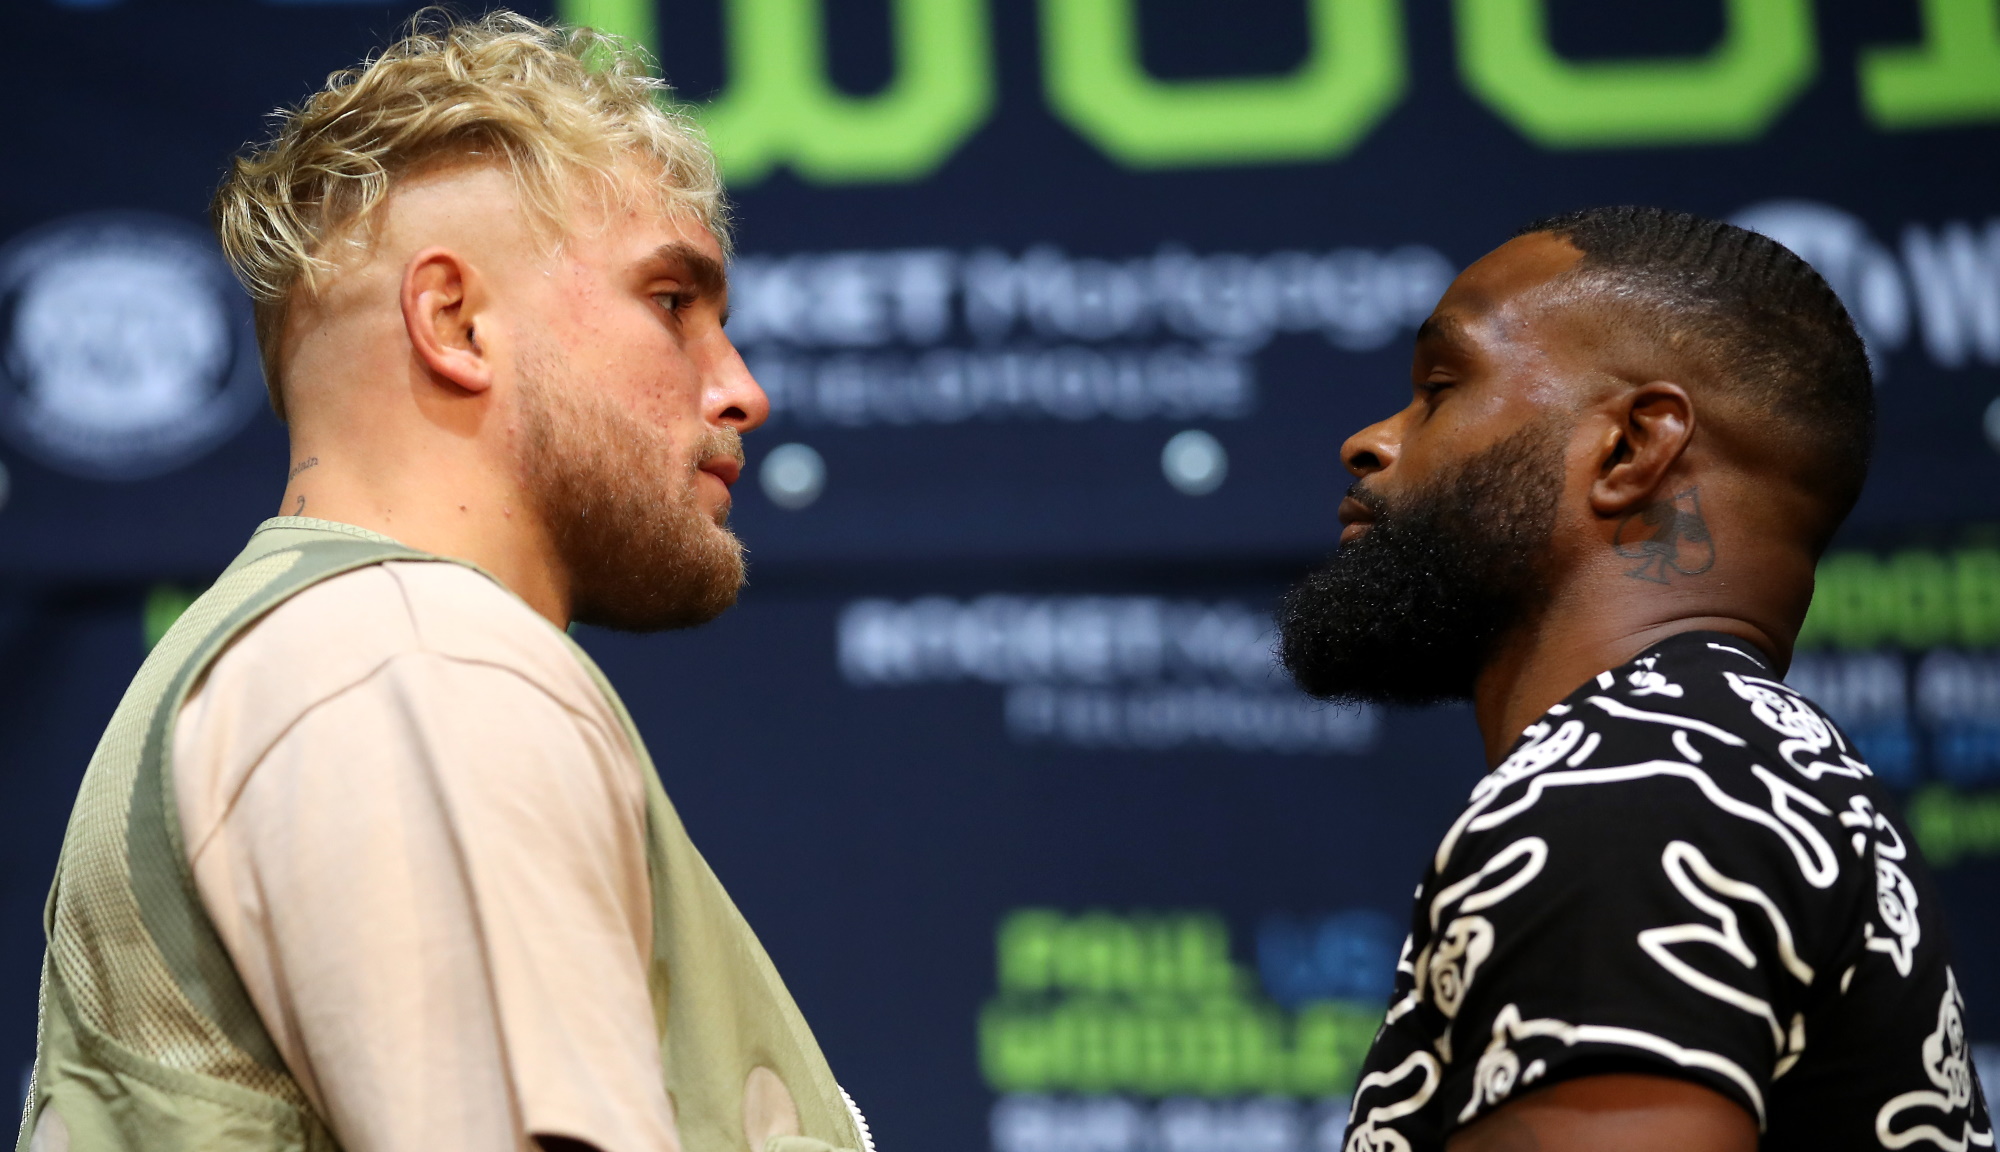 Jake Paul and Tyron Woodley face-off during press conference